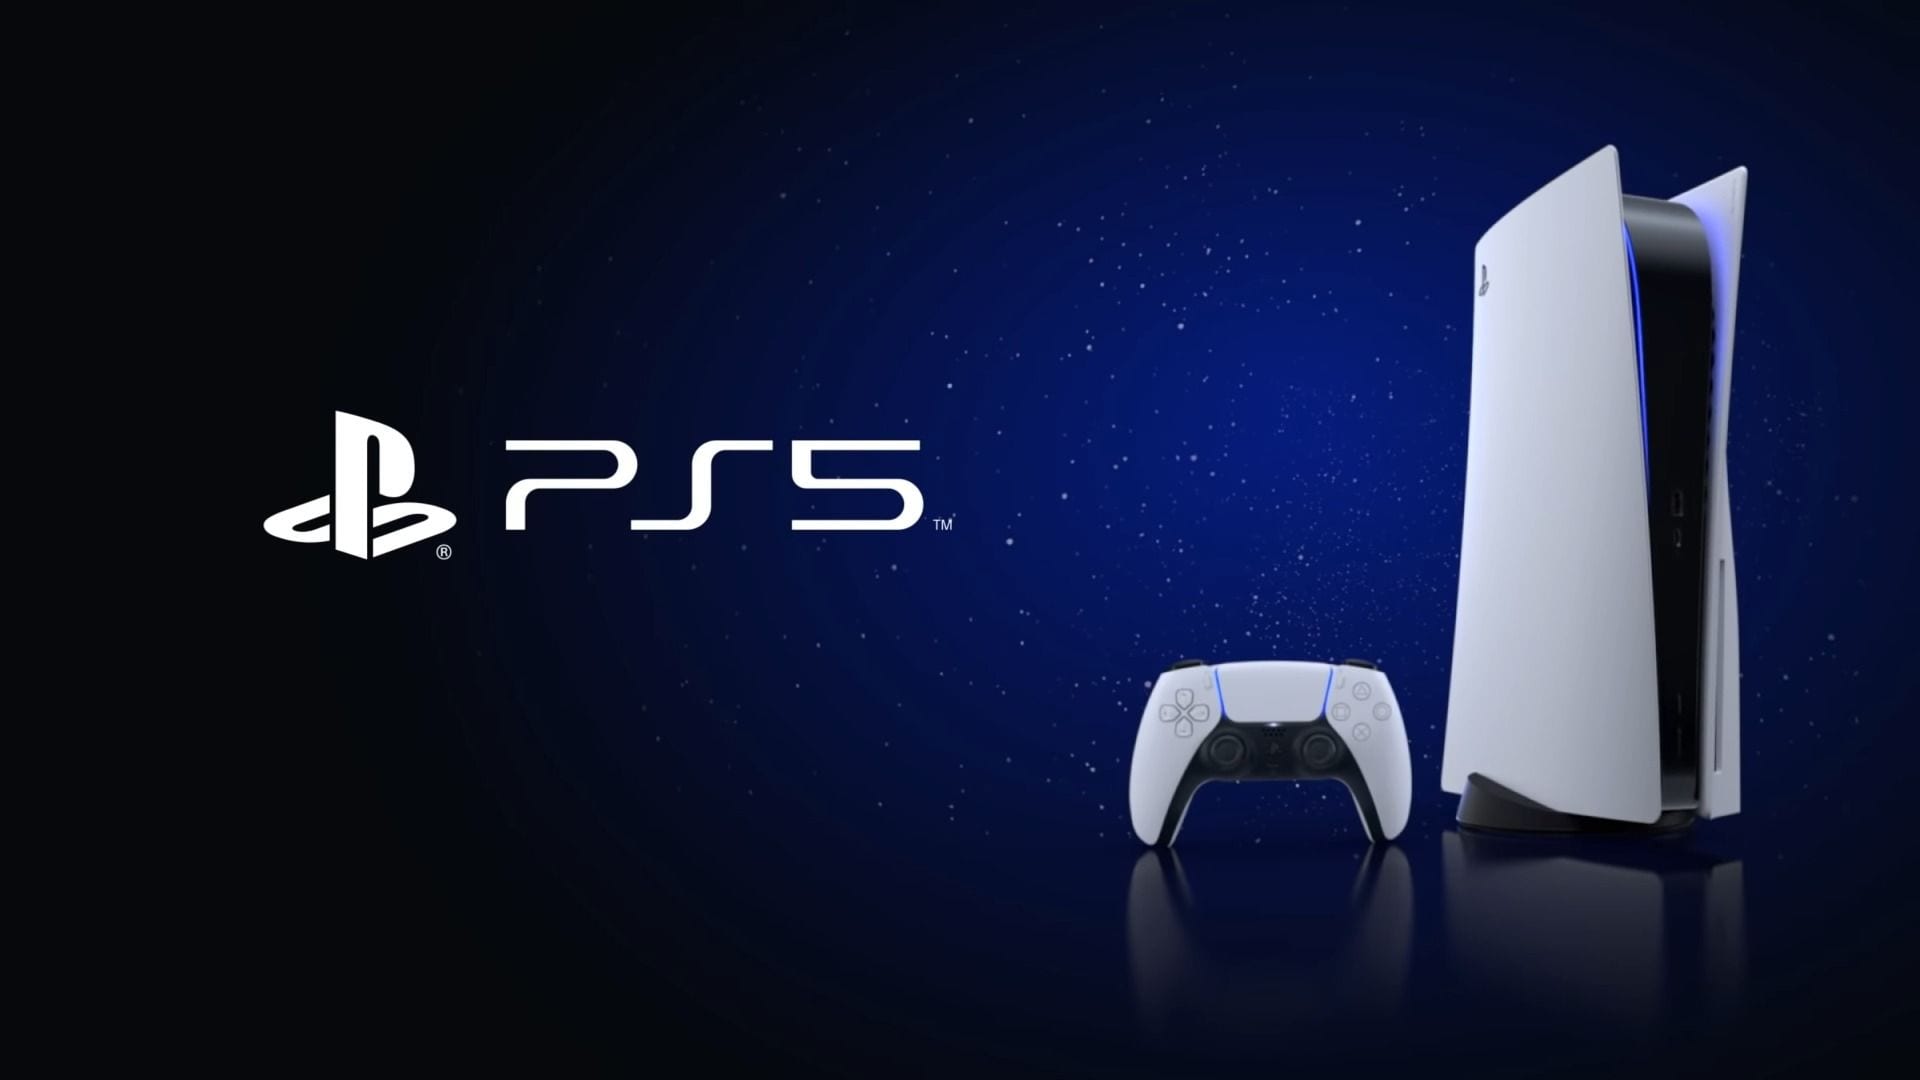 Ps5 Unboxing Video From Sony Japan Shows Console Accessories